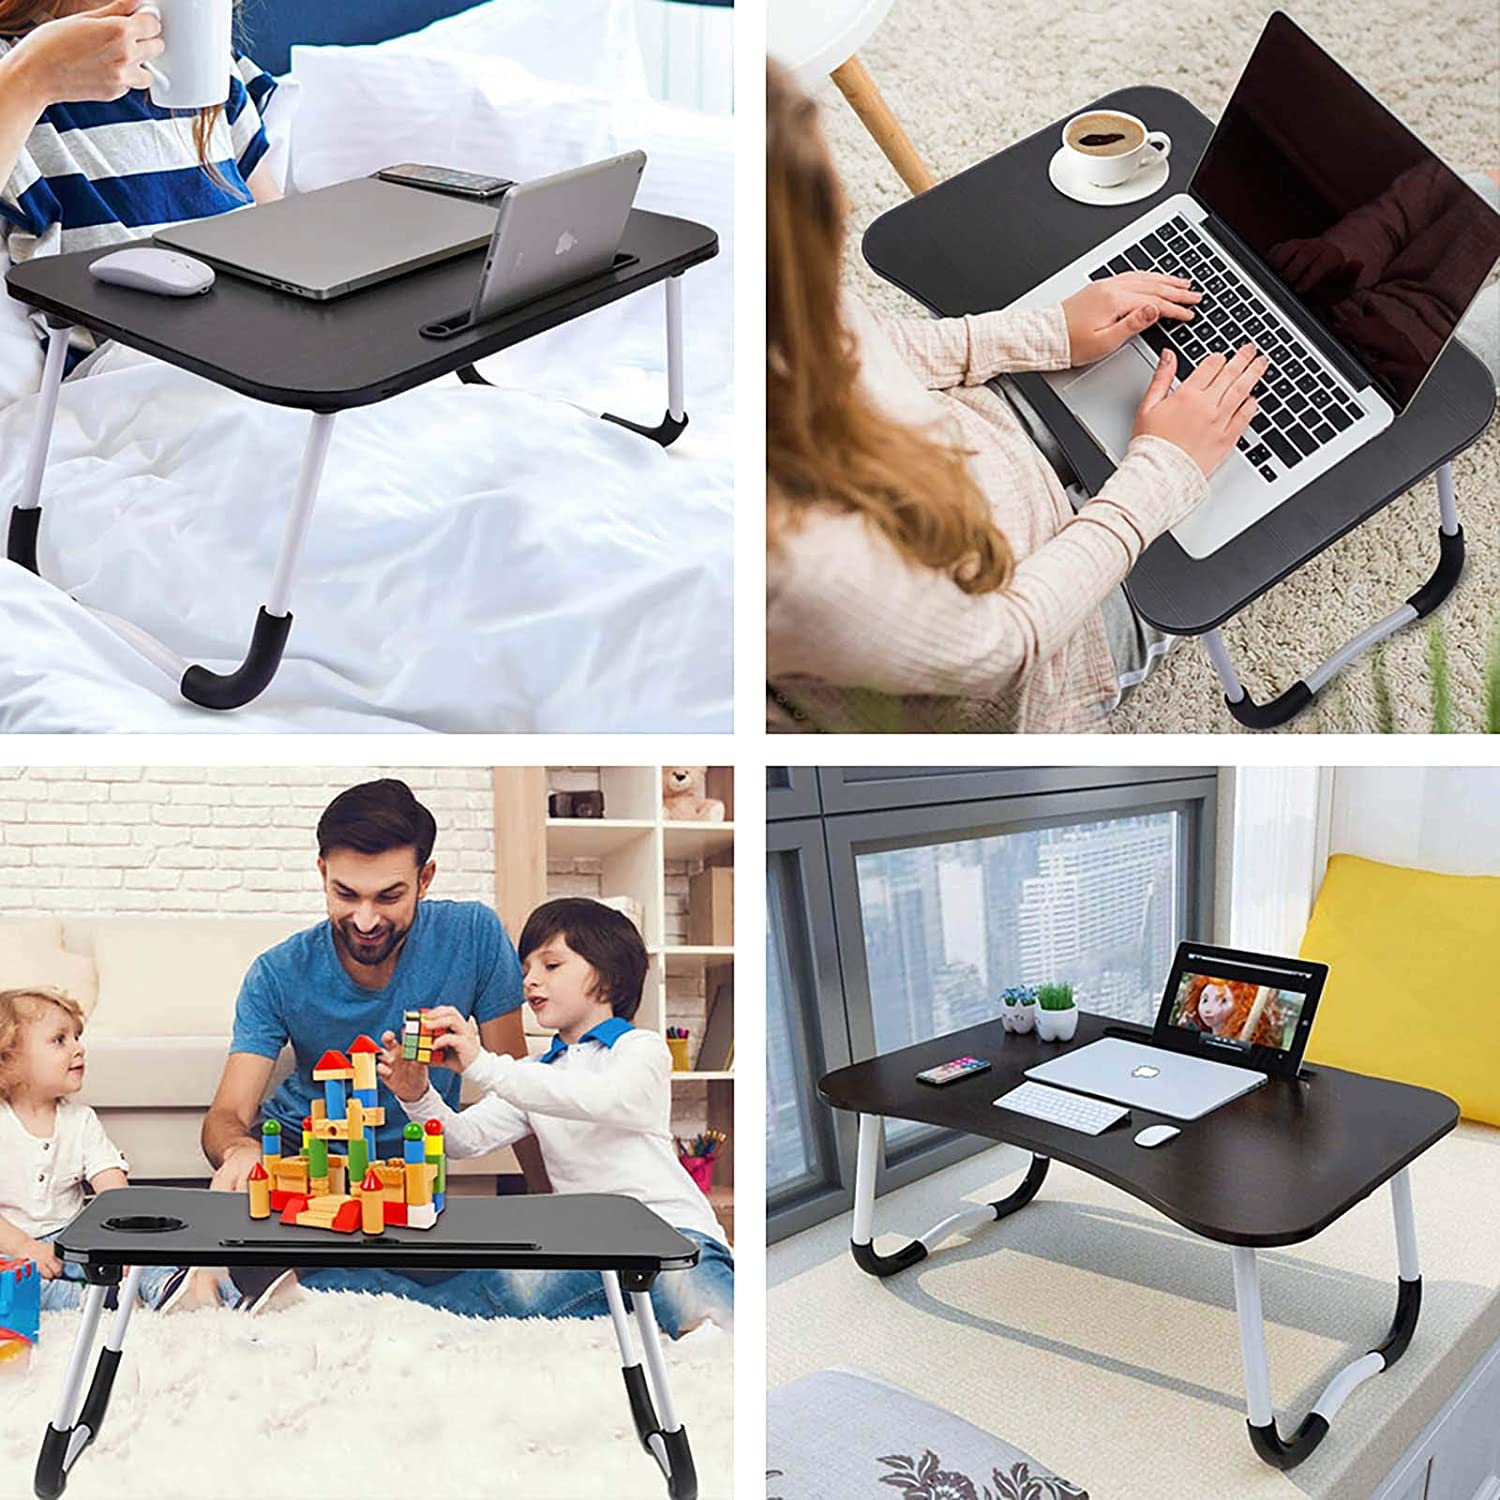 Multifunctional-Folding-Wooden-Lazy-Bed-Desk-Macbook-Table-with-Pen-Cup-Slot-Storage-Drawer-1874952-10